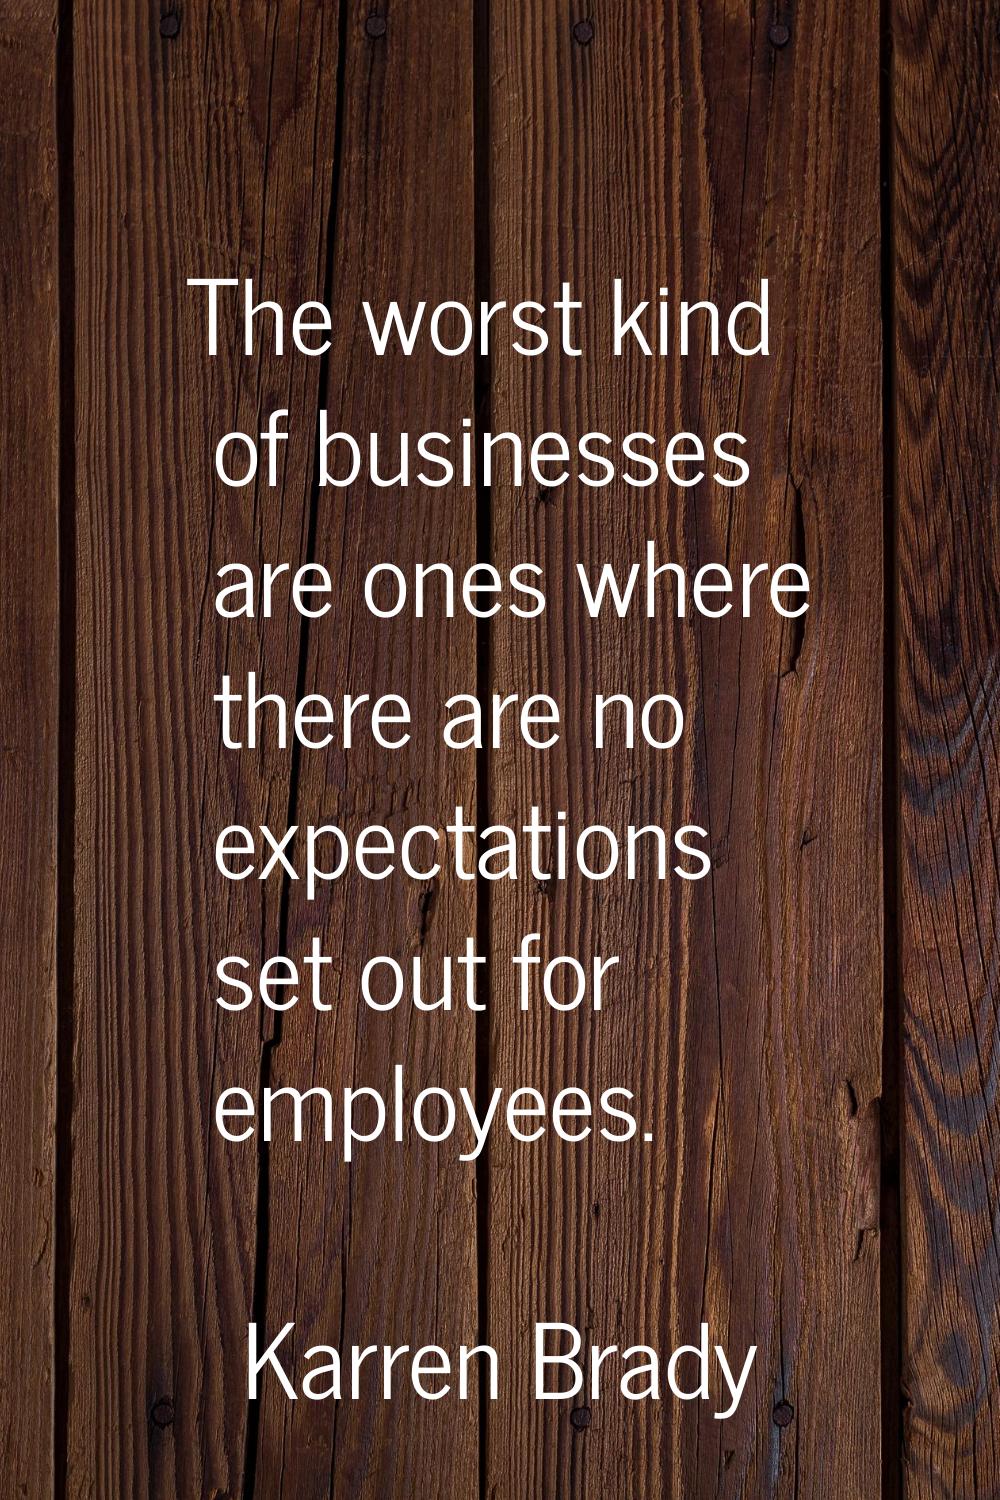 The worst kind of businesses are ones where there are no expectations set out for employees.